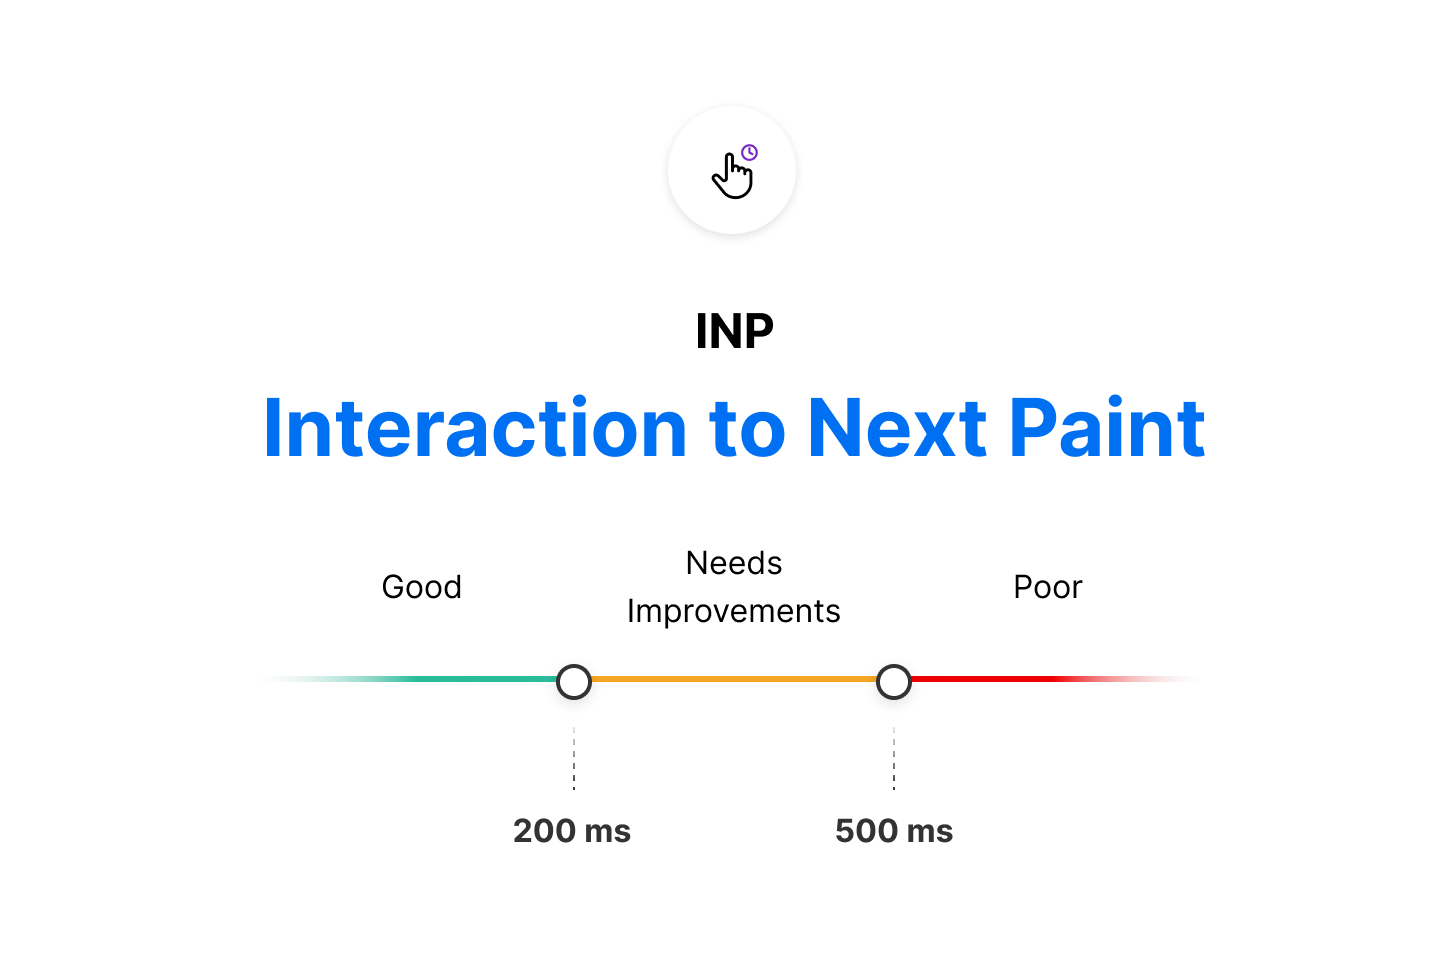 An INP below or at 200 milliseconds means that your page has good responsiveness.